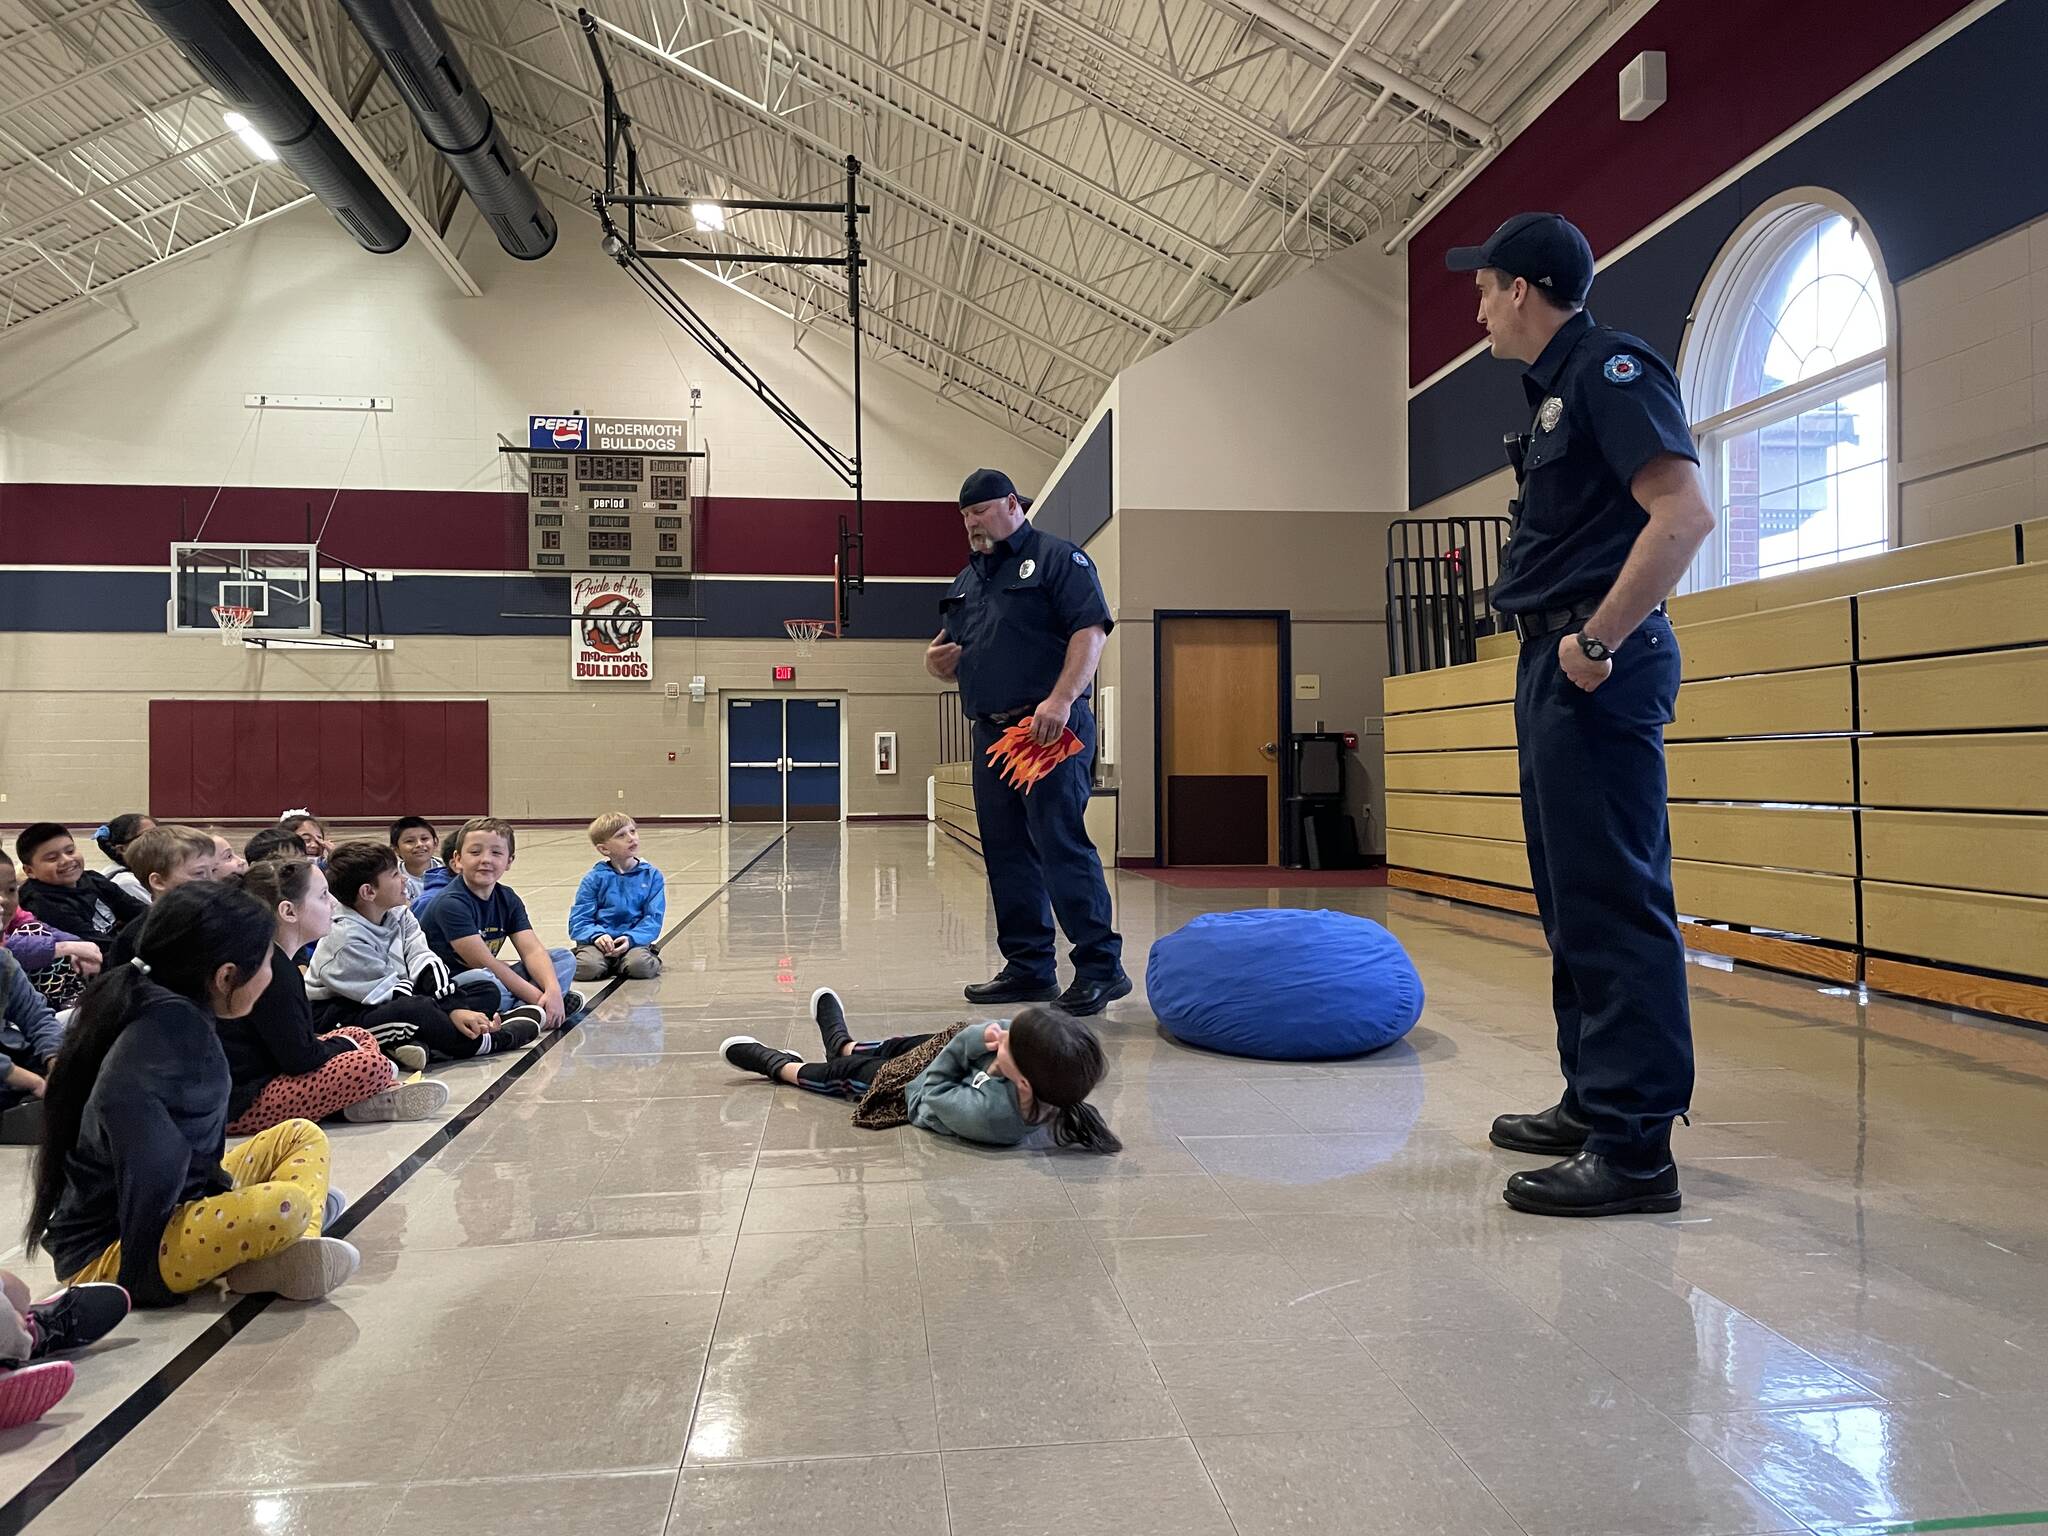 Michael S. Lockett | The Daily World
A second-grader at McDermoth Elementary School demonstrates their stop-drop-and-roll technique during a Fire Prevention Week presentation from the Aberdeen Fire Department on Monday.